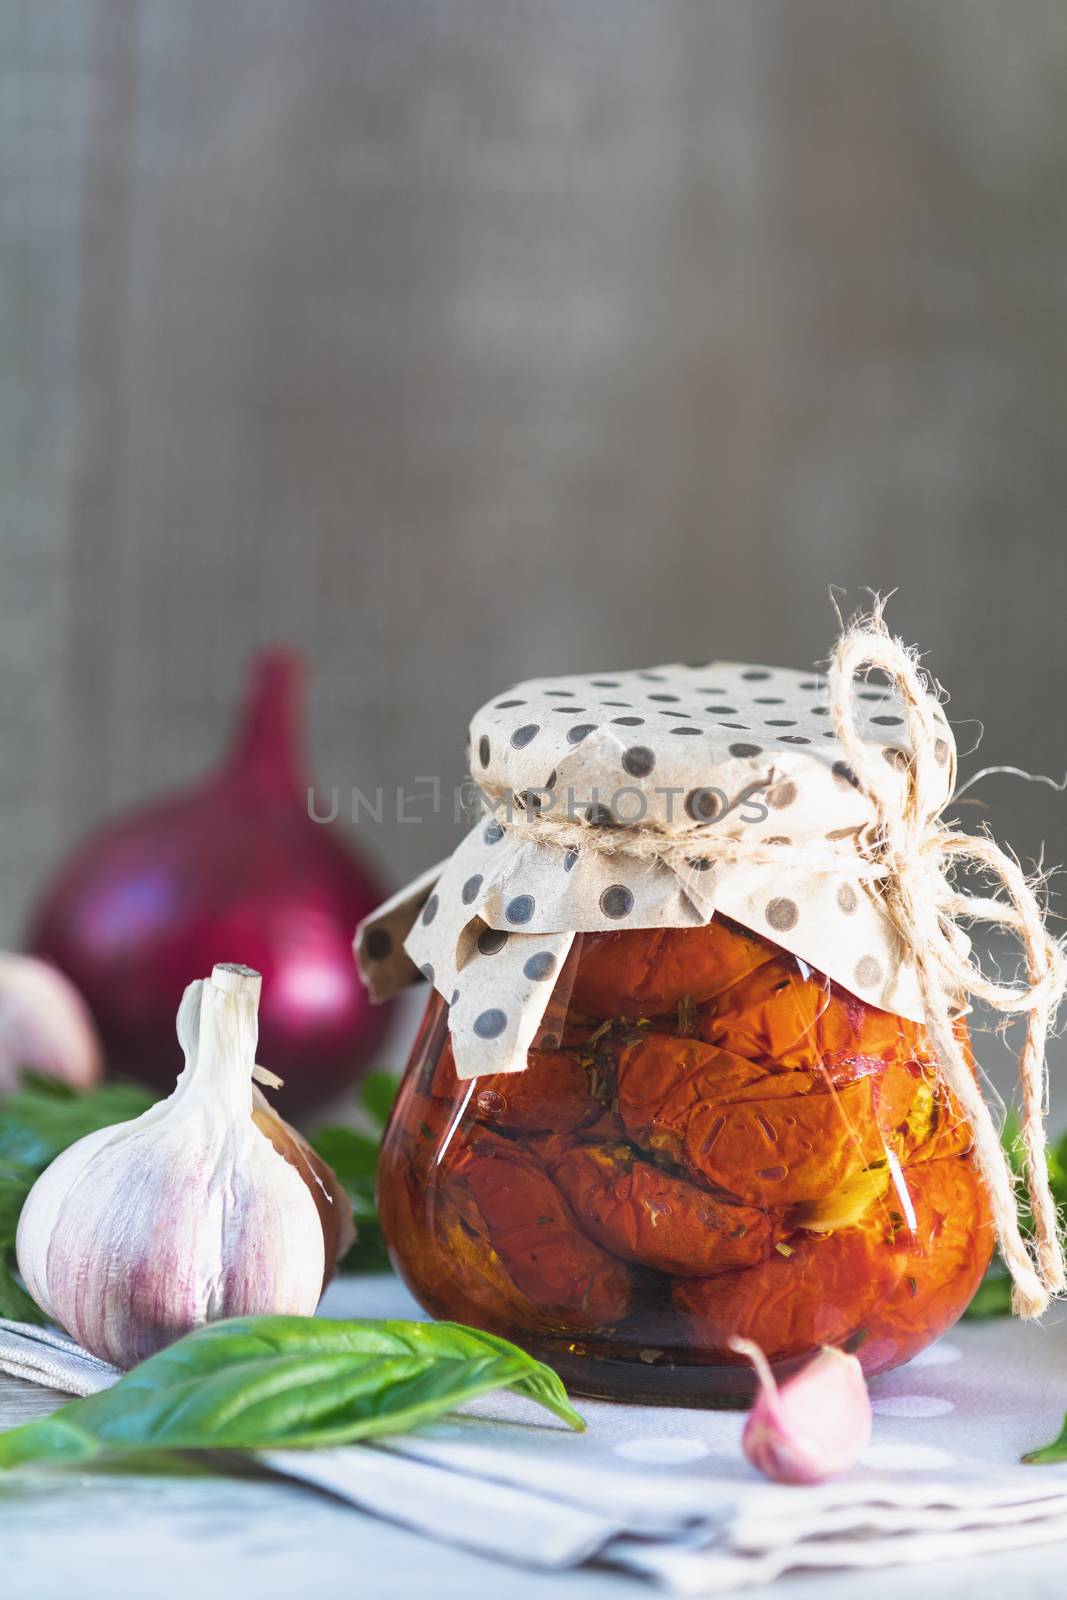 Sun dried tomatoes in glass jar, onion, basil leaves and garlic on cutting board, on wooden background